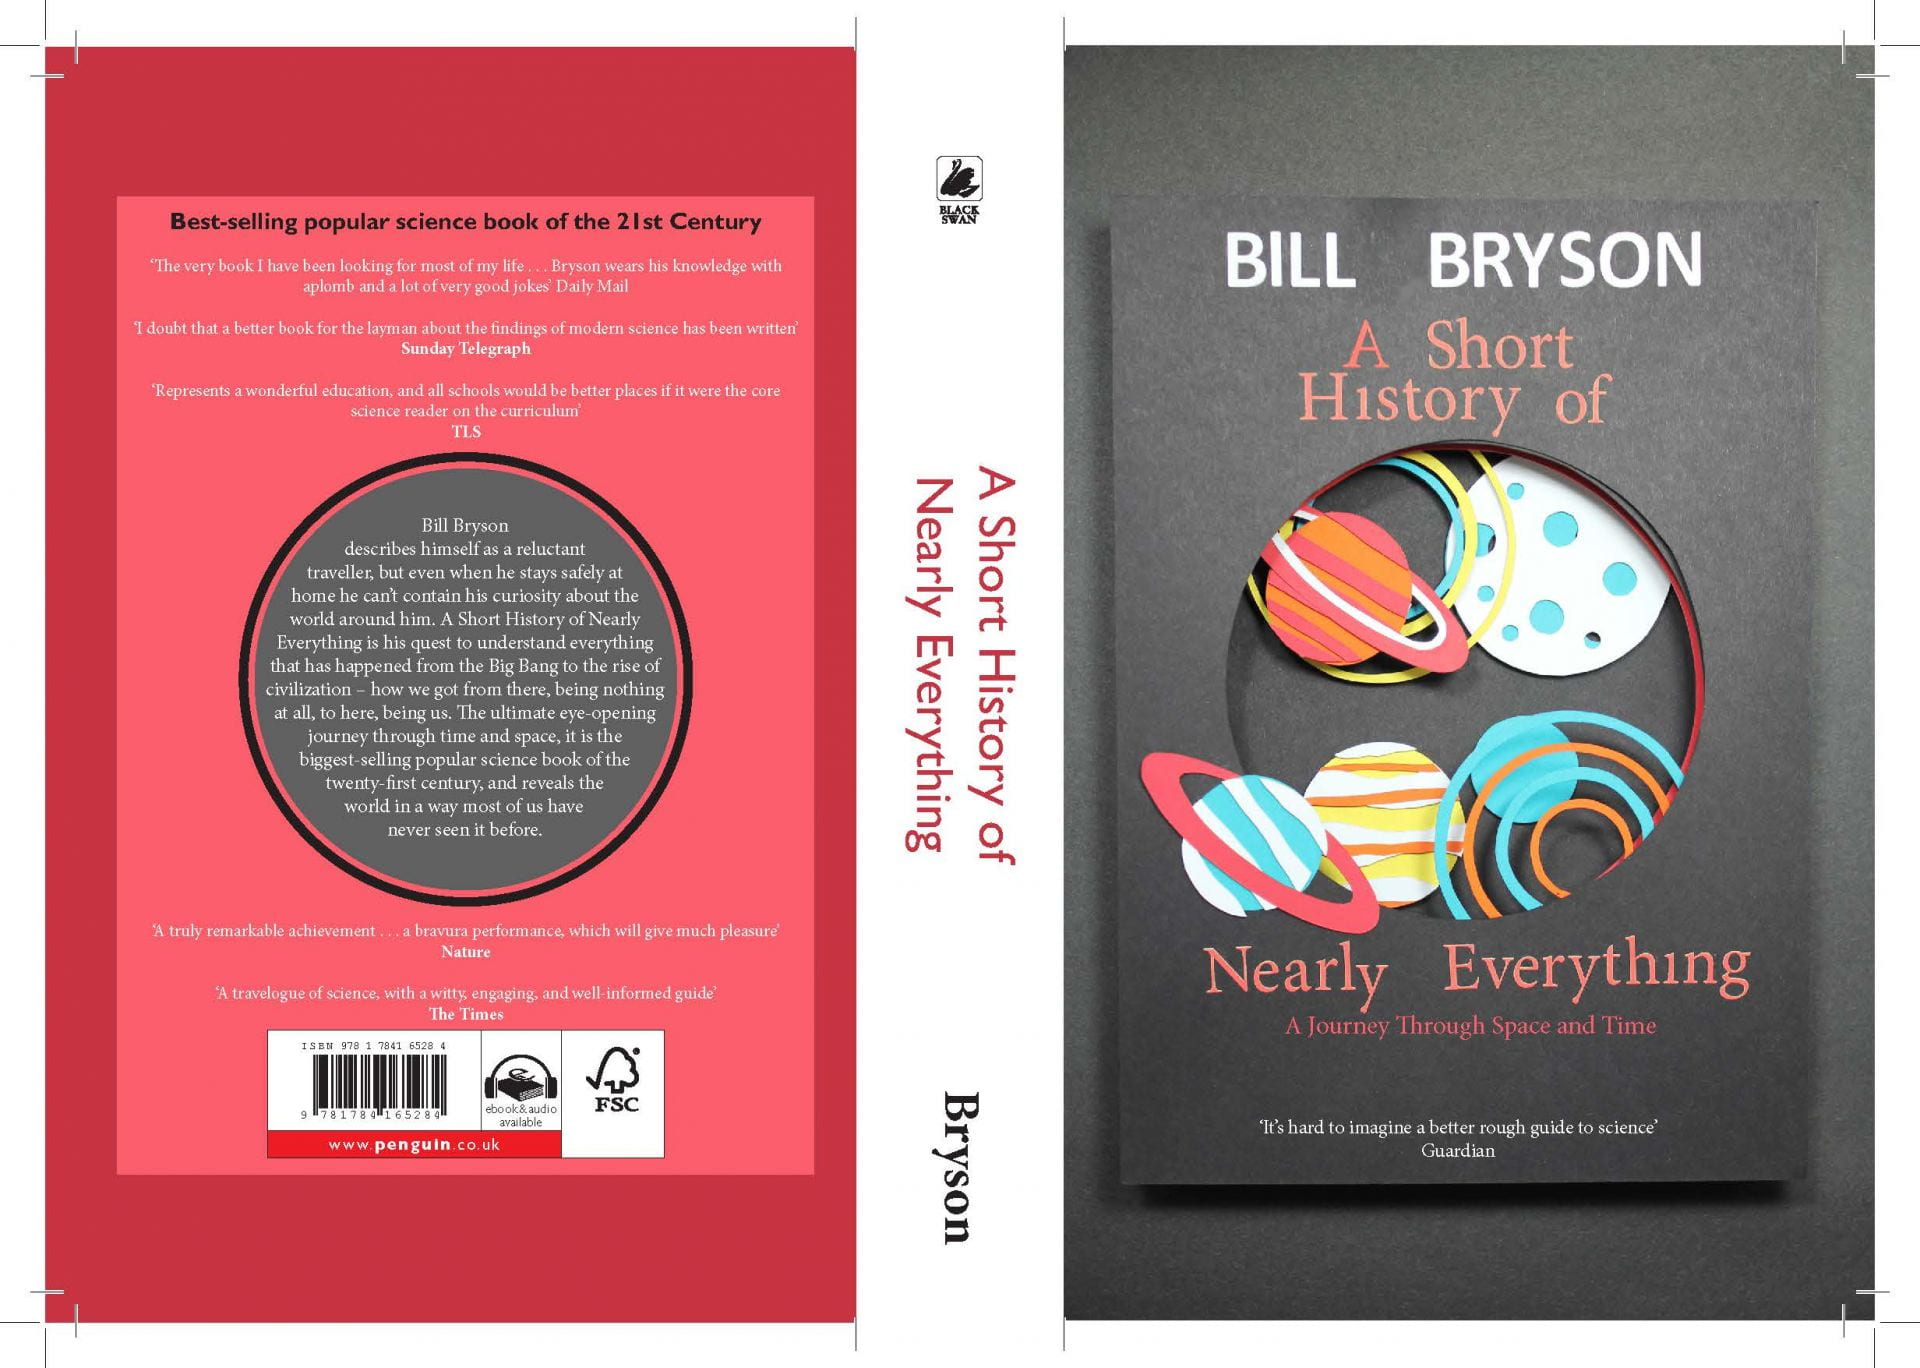 3D book cover with overlapping planets on Bill Bryson's 'A short history of nearly everything' and back blurb.